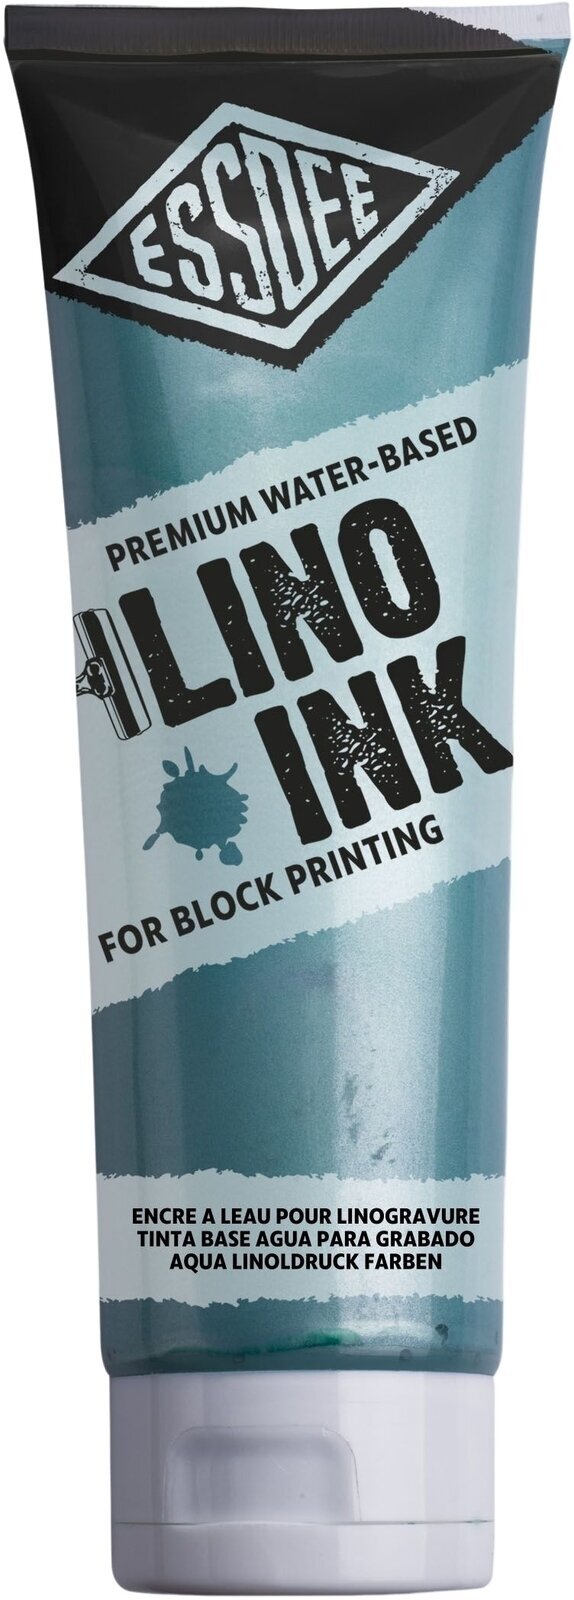 Paint For Linocut Essdee Block Printing Ink Paint For Linocut Pearlescent Green 300 ml